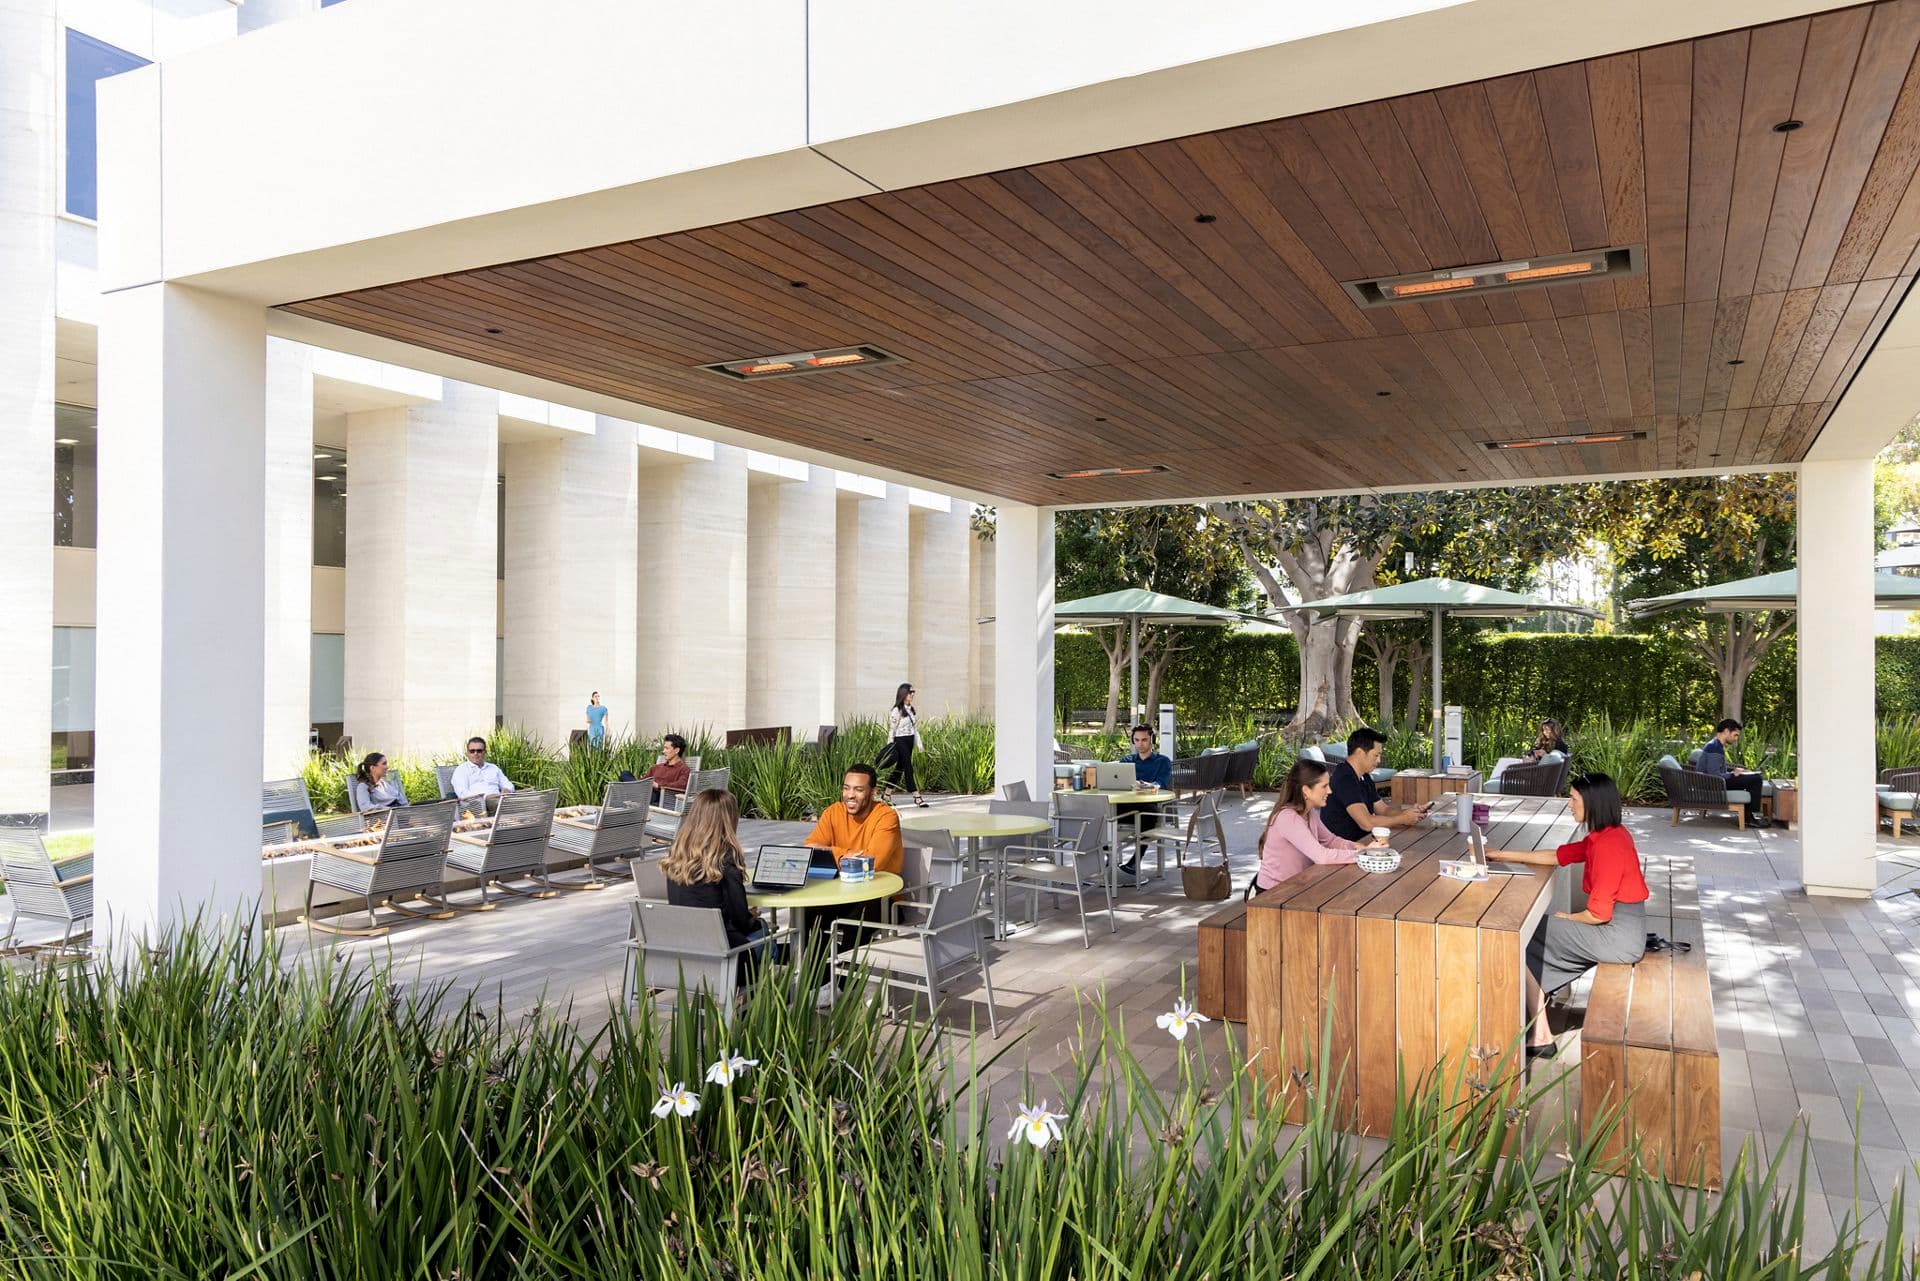 Exterior view of The Commons at 3 Park Plaza at Jamboree Center in Irvine, CA.